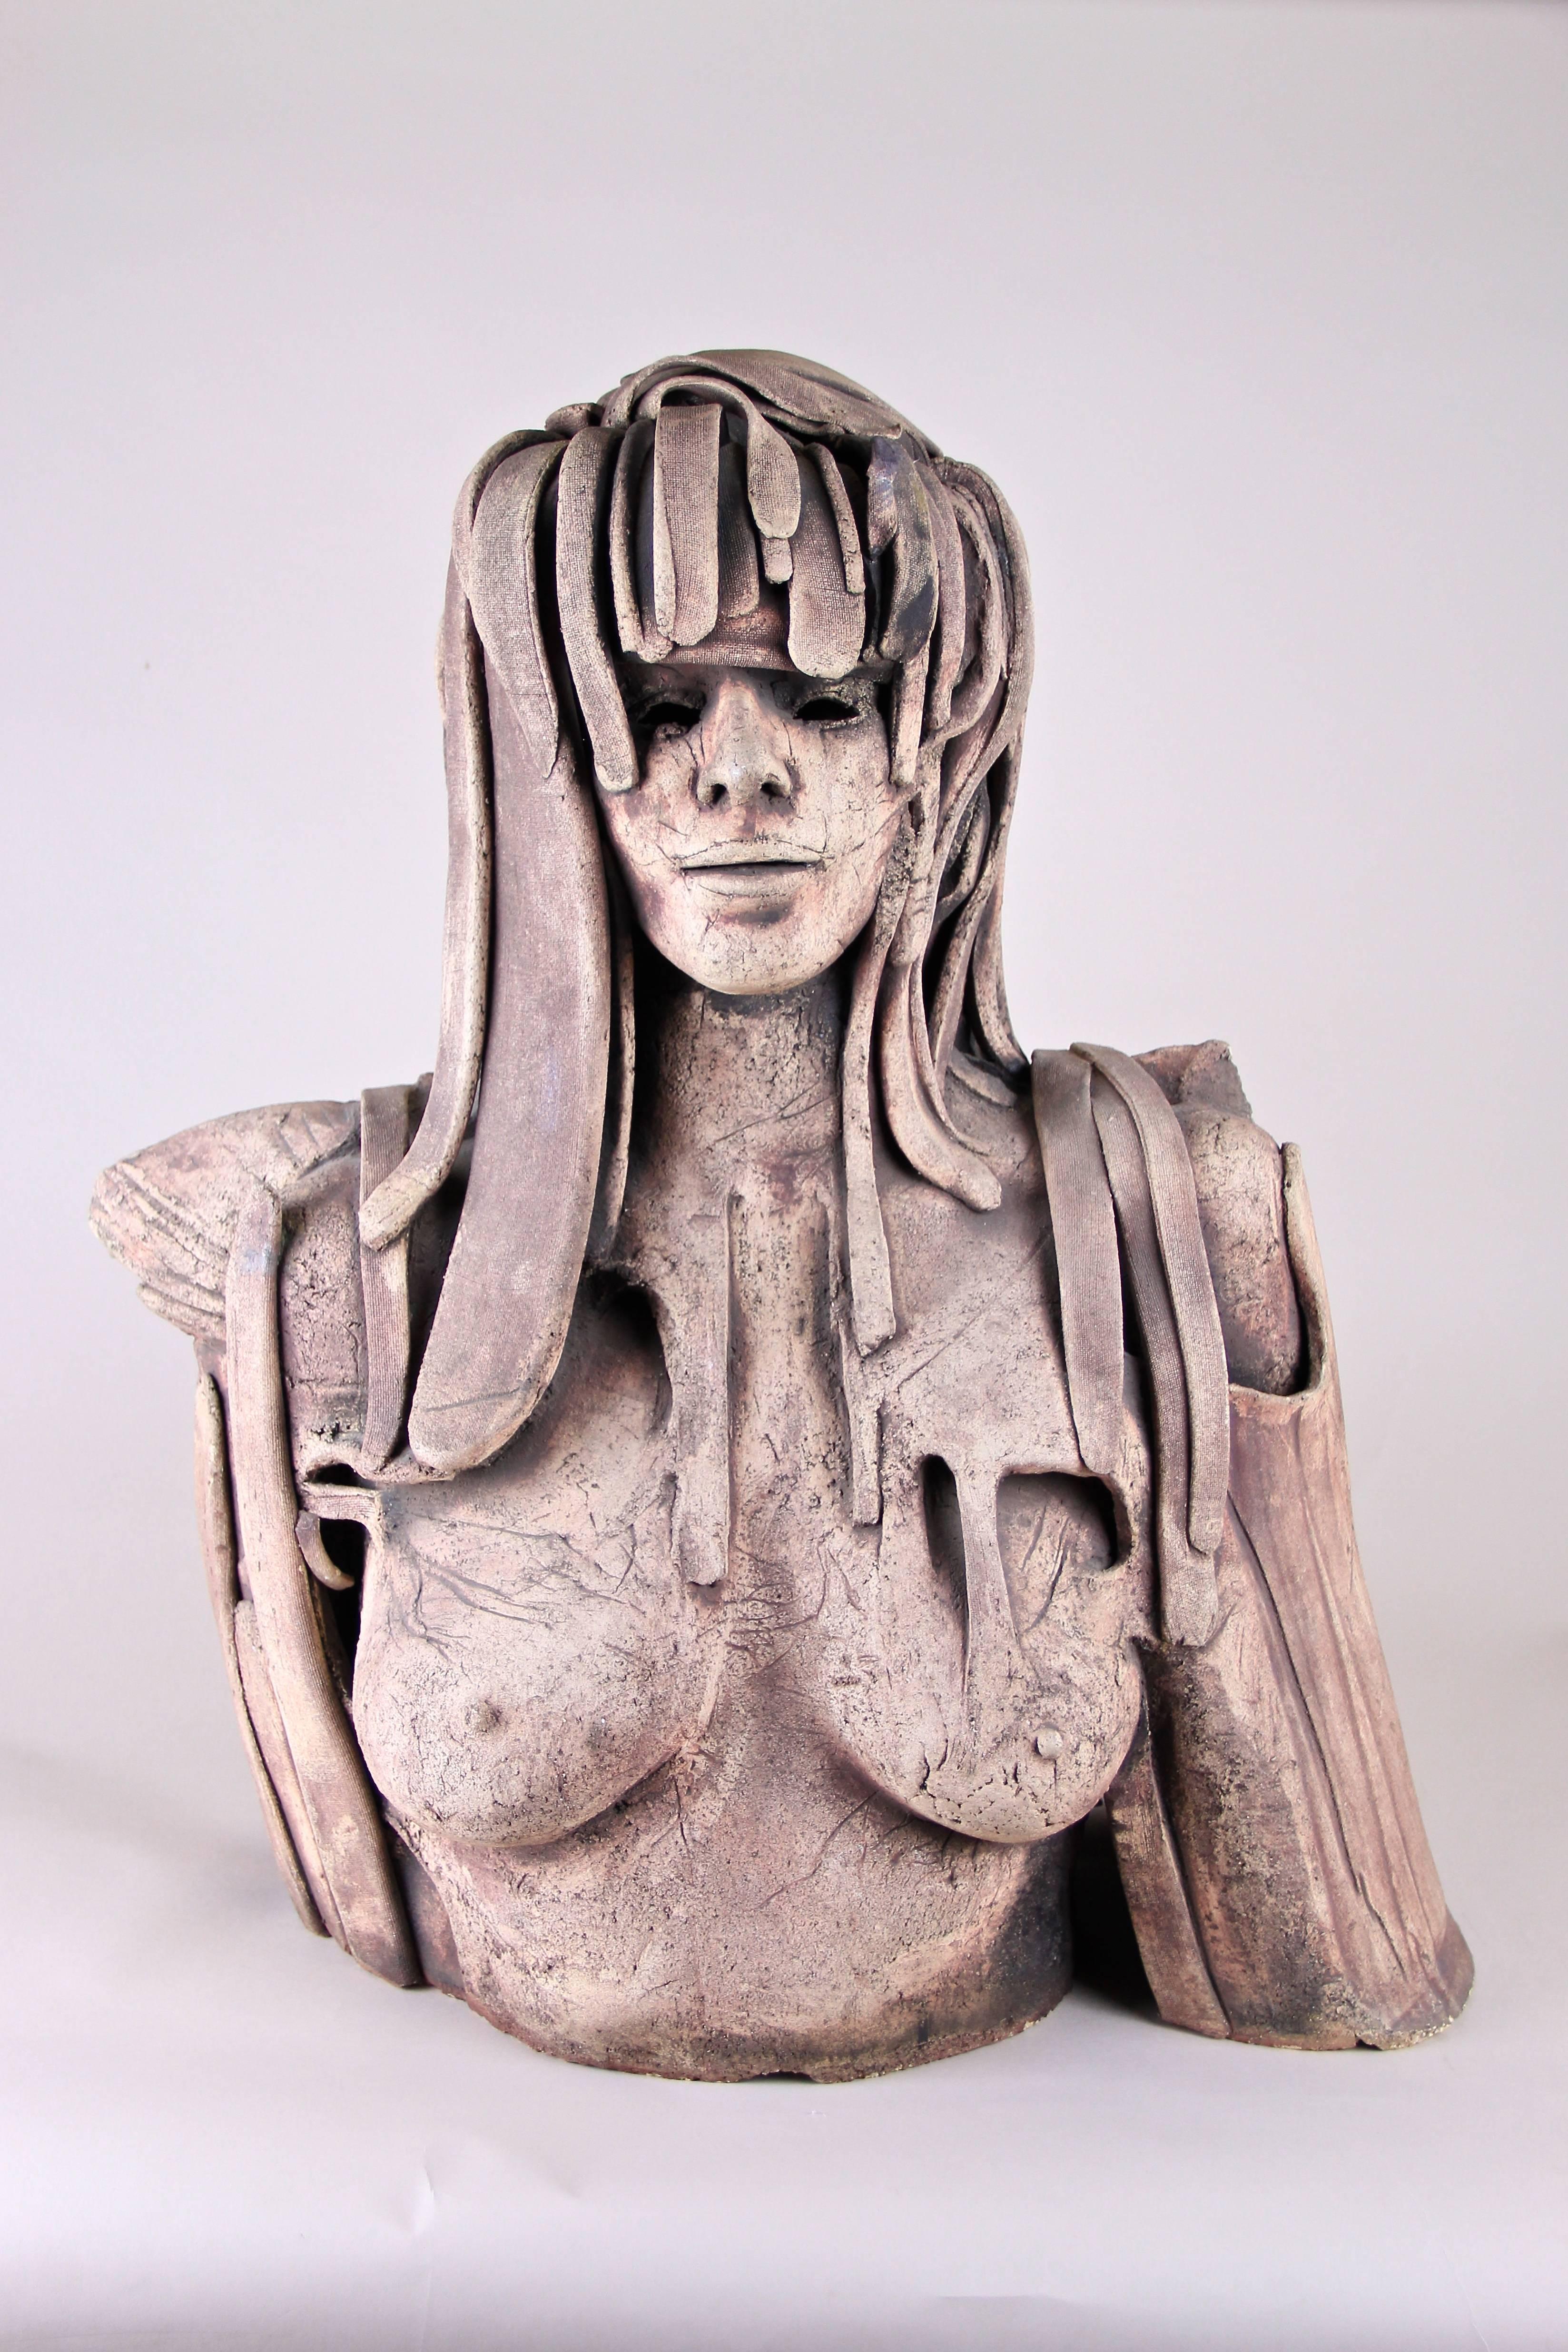 Out of the ordinary modern terracotta sculpture from the 1970s in Belgium. This large exceptional bust depicts a female postapocalyptic warrior processed in an very unique technique. Super realistic features, looking like a real face wrapped in